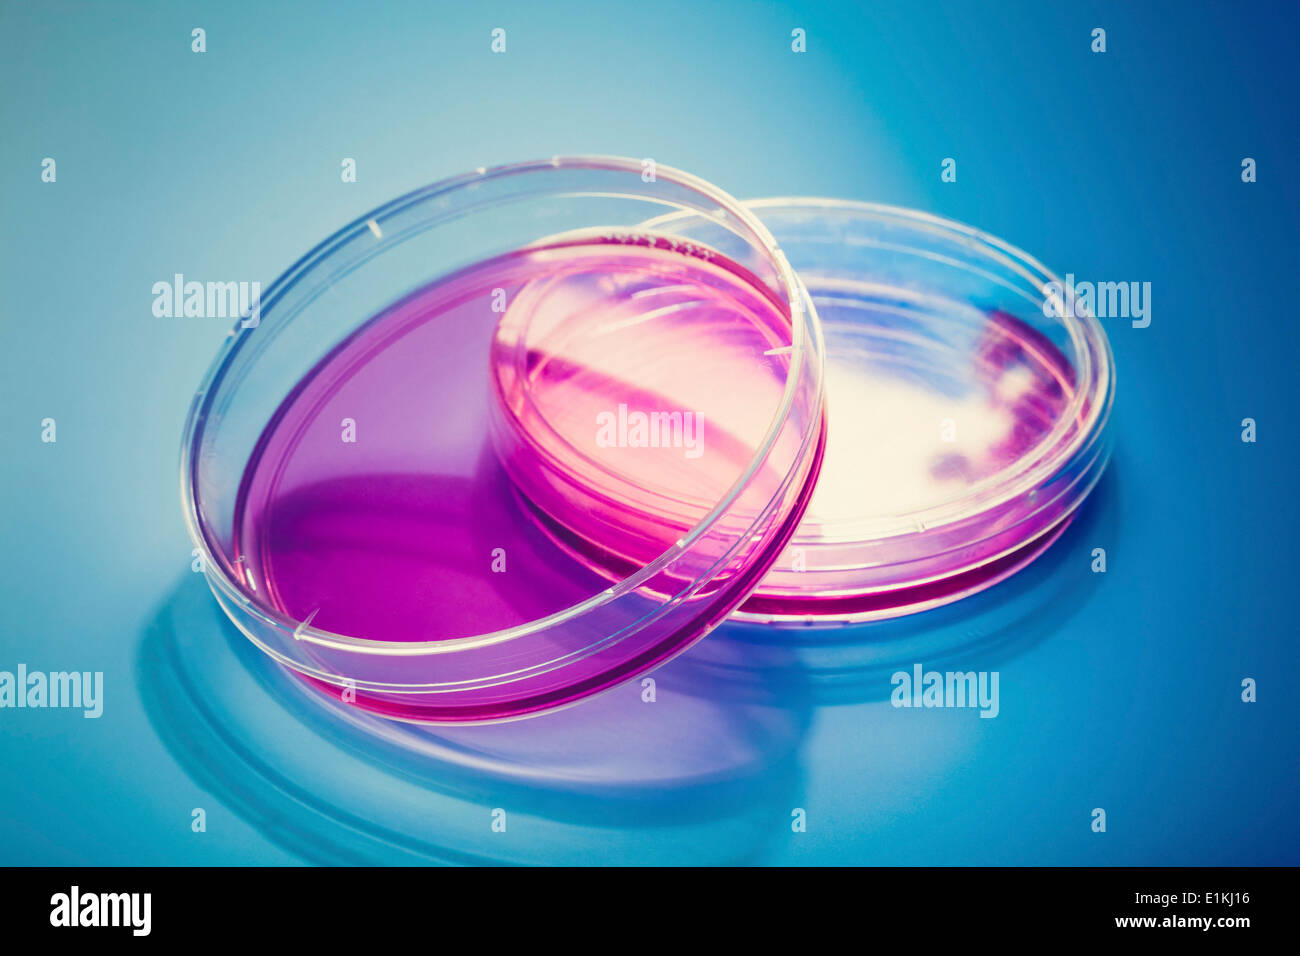 Petri dishes against blue background. Stock Photo